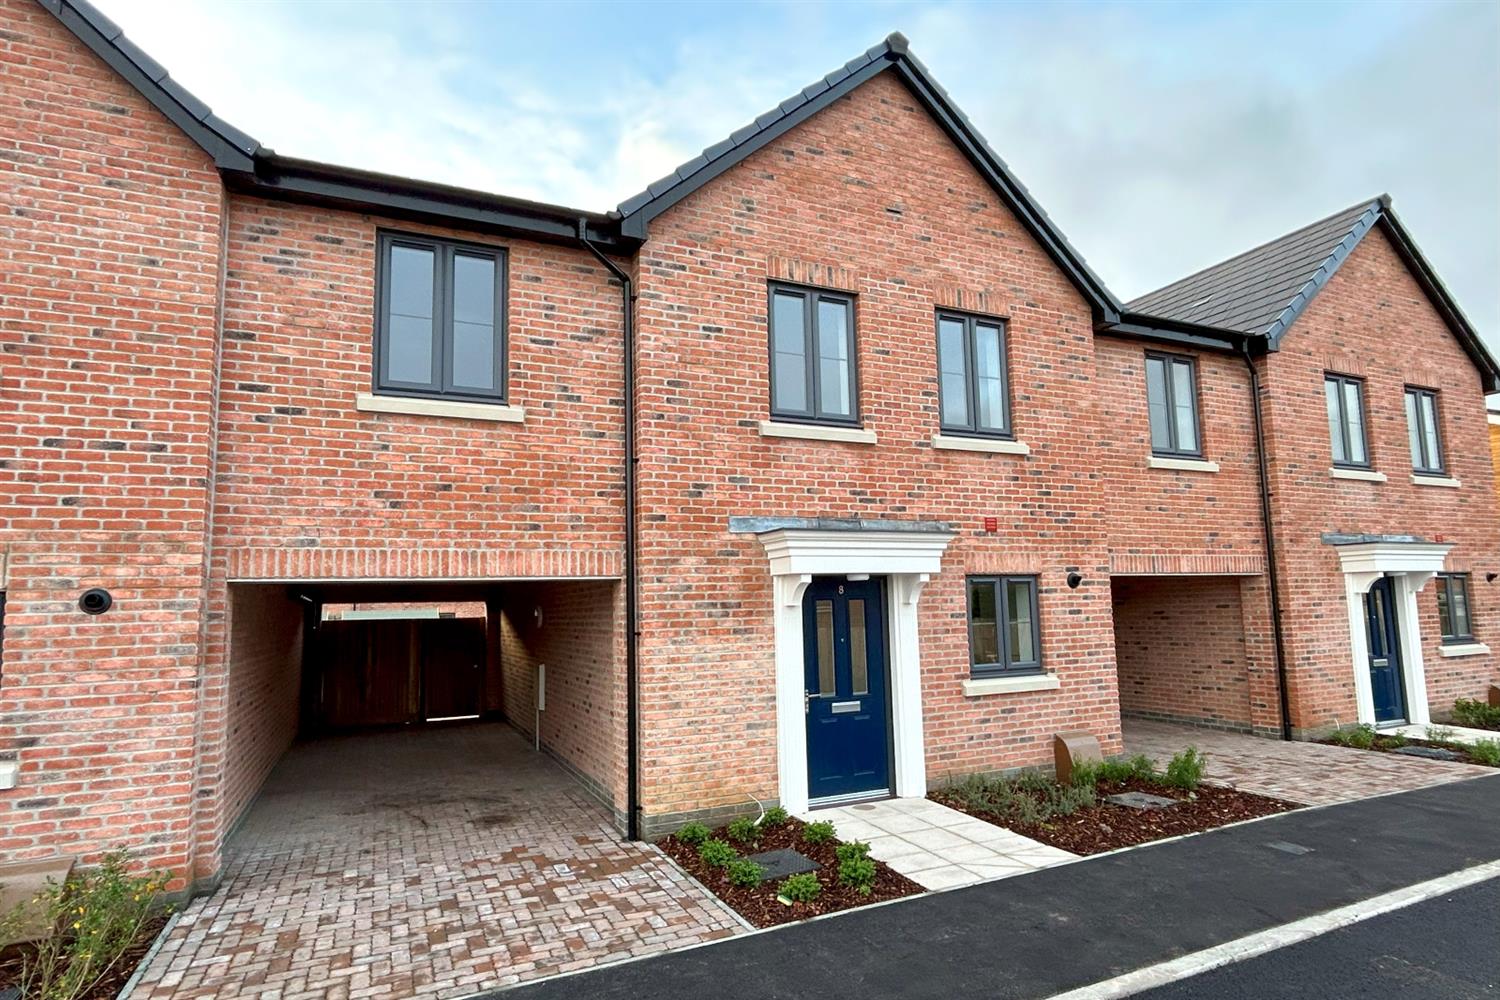 Brand New Four Bedroom House On The Outskirts Of Wimborne Town Centre